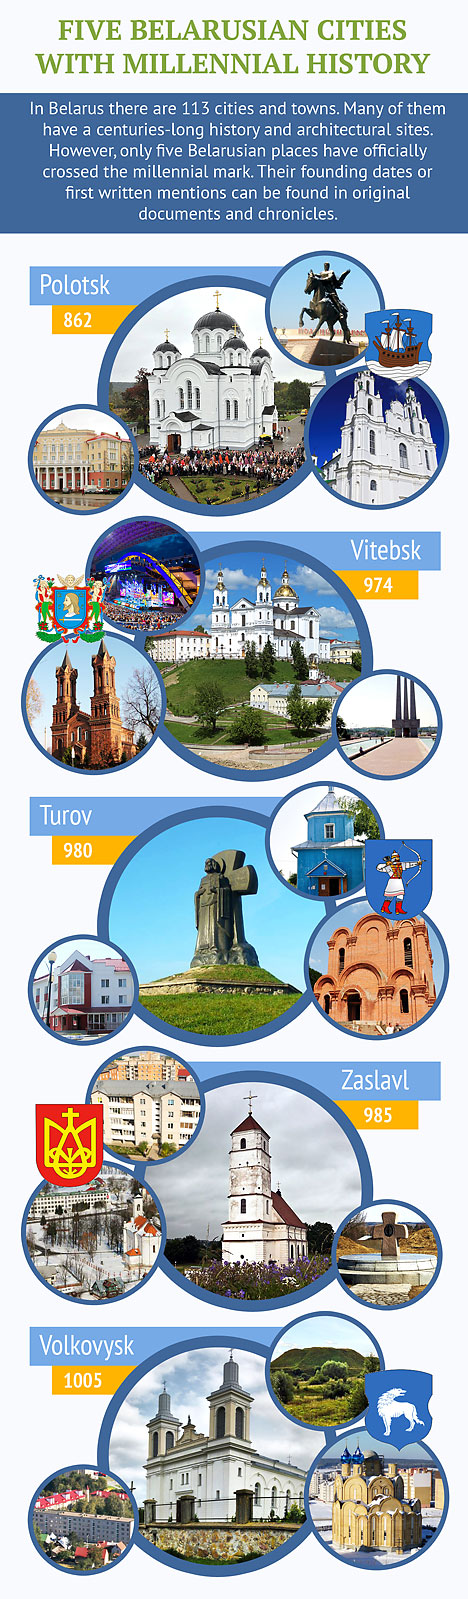 Five Belarusian cities with millennial history